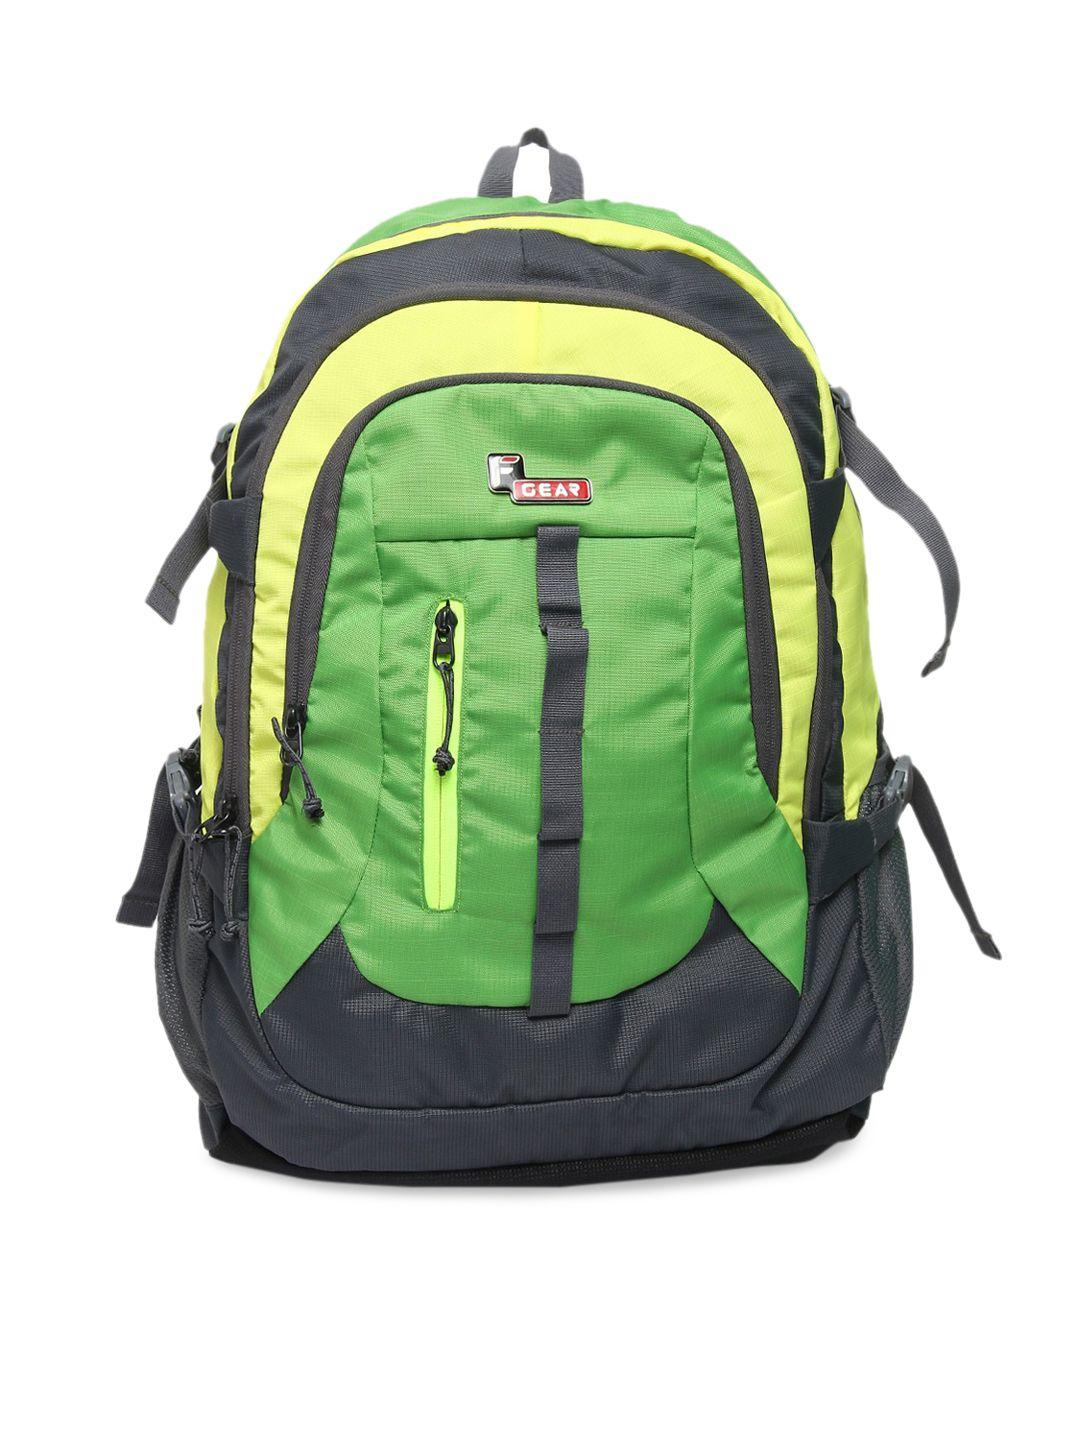 f gear unisex grey & green colourblocked backpacks with compression straps